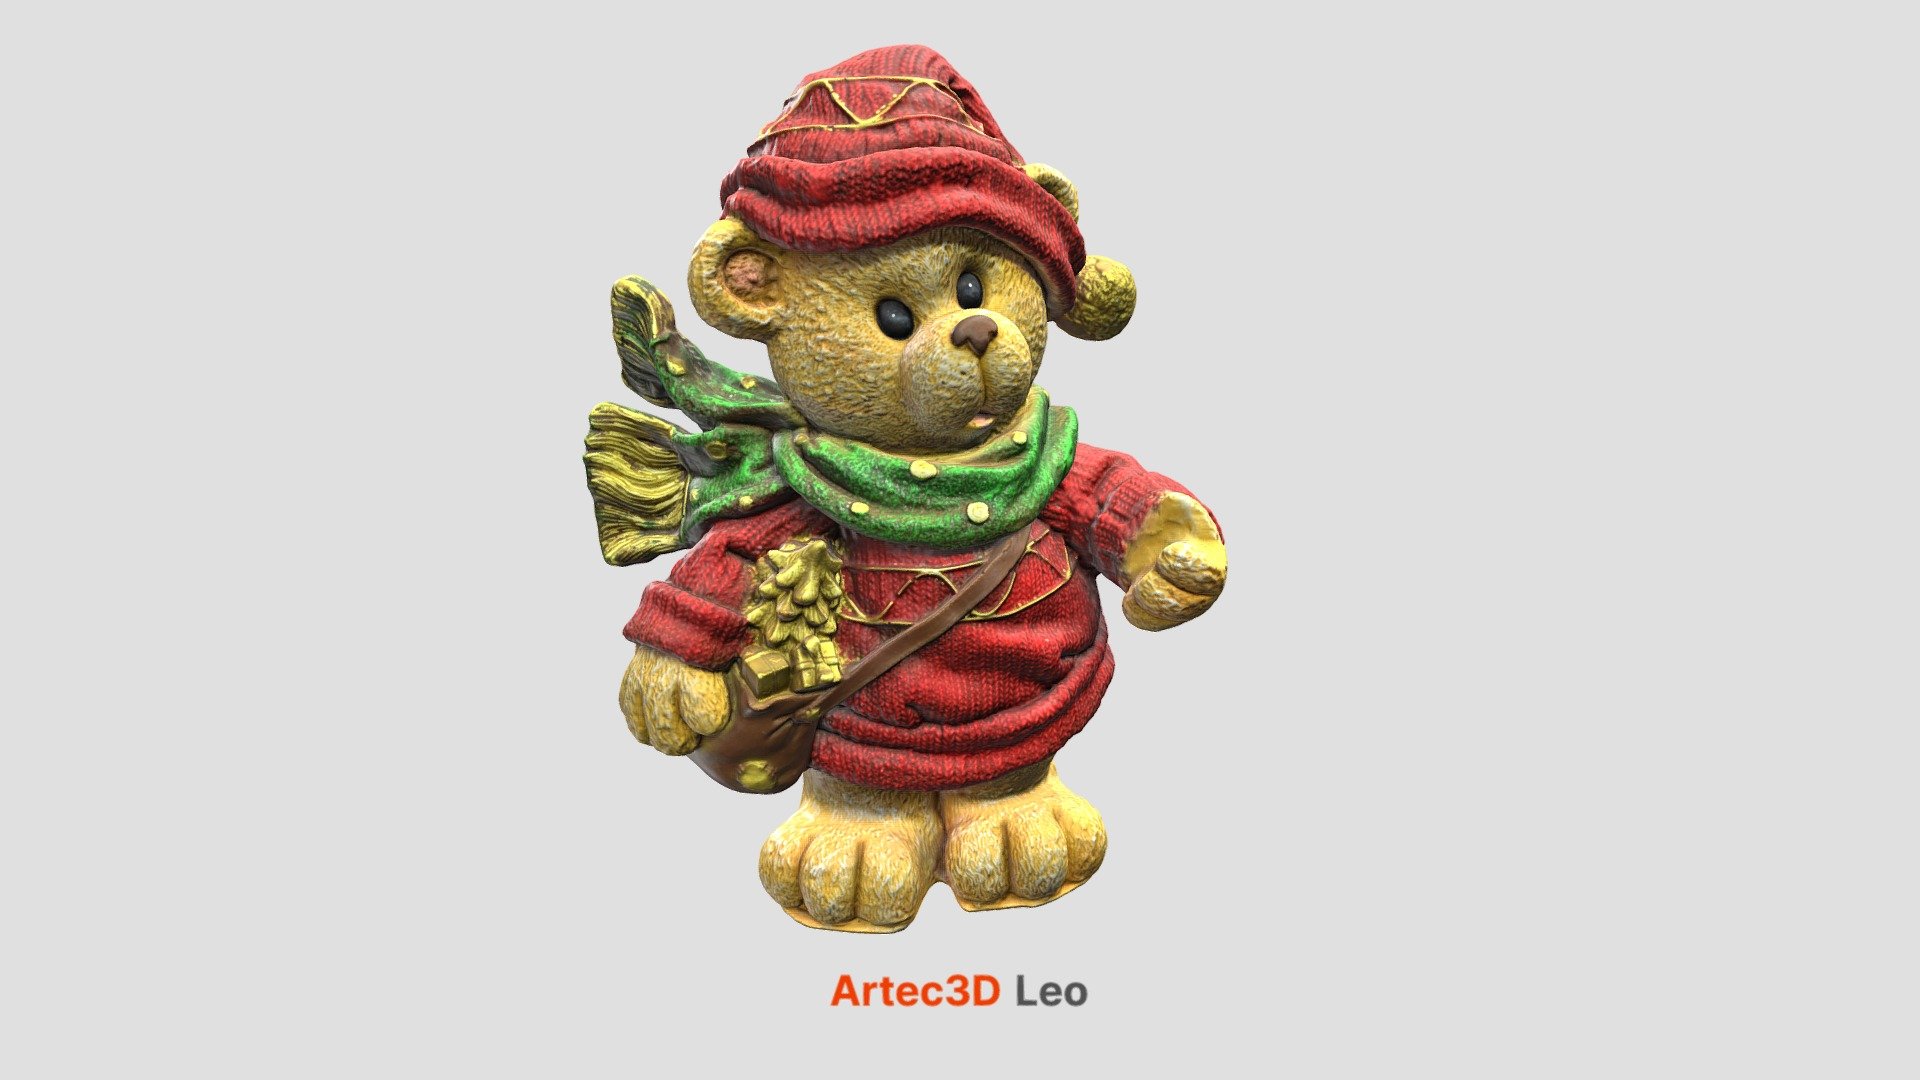 A 3D model of a Christmas bear brought to you by Artec Leo, a photo camera, and Artec Studio 16’s all-new photo texturing feature. The bear was put on a turntable for full coverage, then scanned and photographed in a standing and lying position to make sure all the hard-to-reach areas were captured. Artec Leo, the fastest wireless scanner on the market, was able to get scans of photo-realistic accuracy in three takes and in less than 30 minutes. These scans were then combined with pictures and processed in Artec Studio 16 for another hour to achieve the best possible texture. Go ahead and rotate the model to admire all the cutest details – a knitted scarf and a sweater, a cross-body bag full of presents, even a pom-pommed beanie, all brilliantly rendered in full color with not a single bit missed. This 3D bear is so realistic it seems not just Christmassy, but seriously fluffy!

Scanning time: 30 min
Processing time: 1 hour - Christmas Bear - 3D model by Artec 3D 3d model